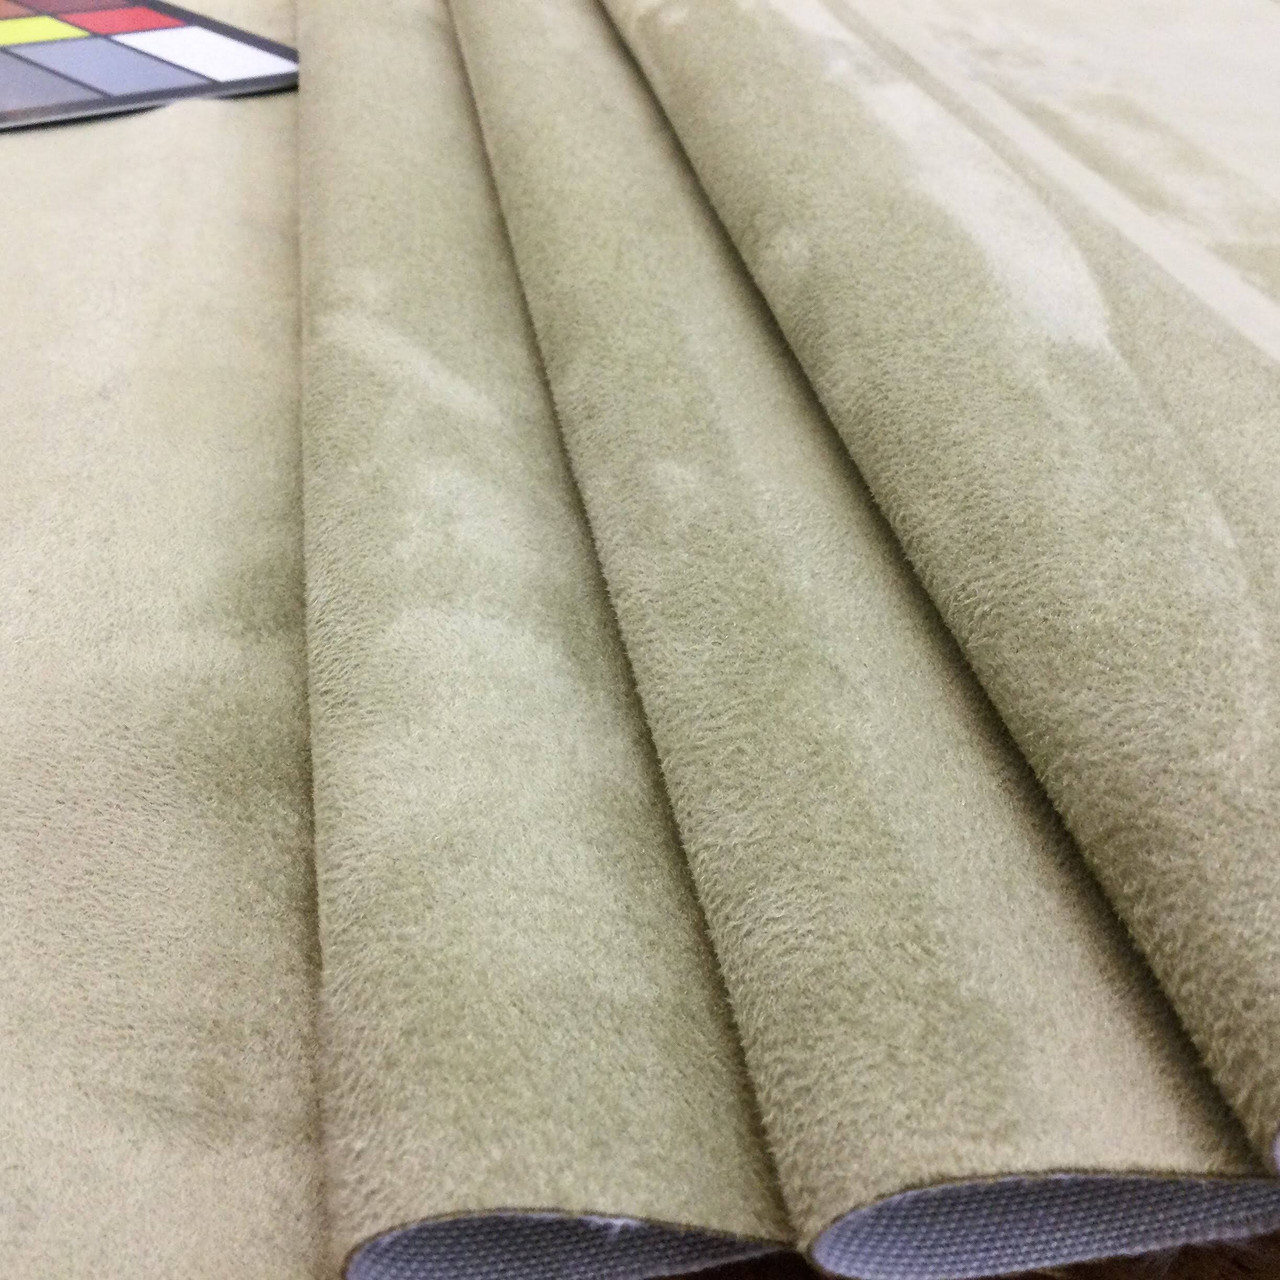 Unisuede in Sage | Solid Sage Green | Microsuede Upholstery Fabric | Heavy  Weight | 54